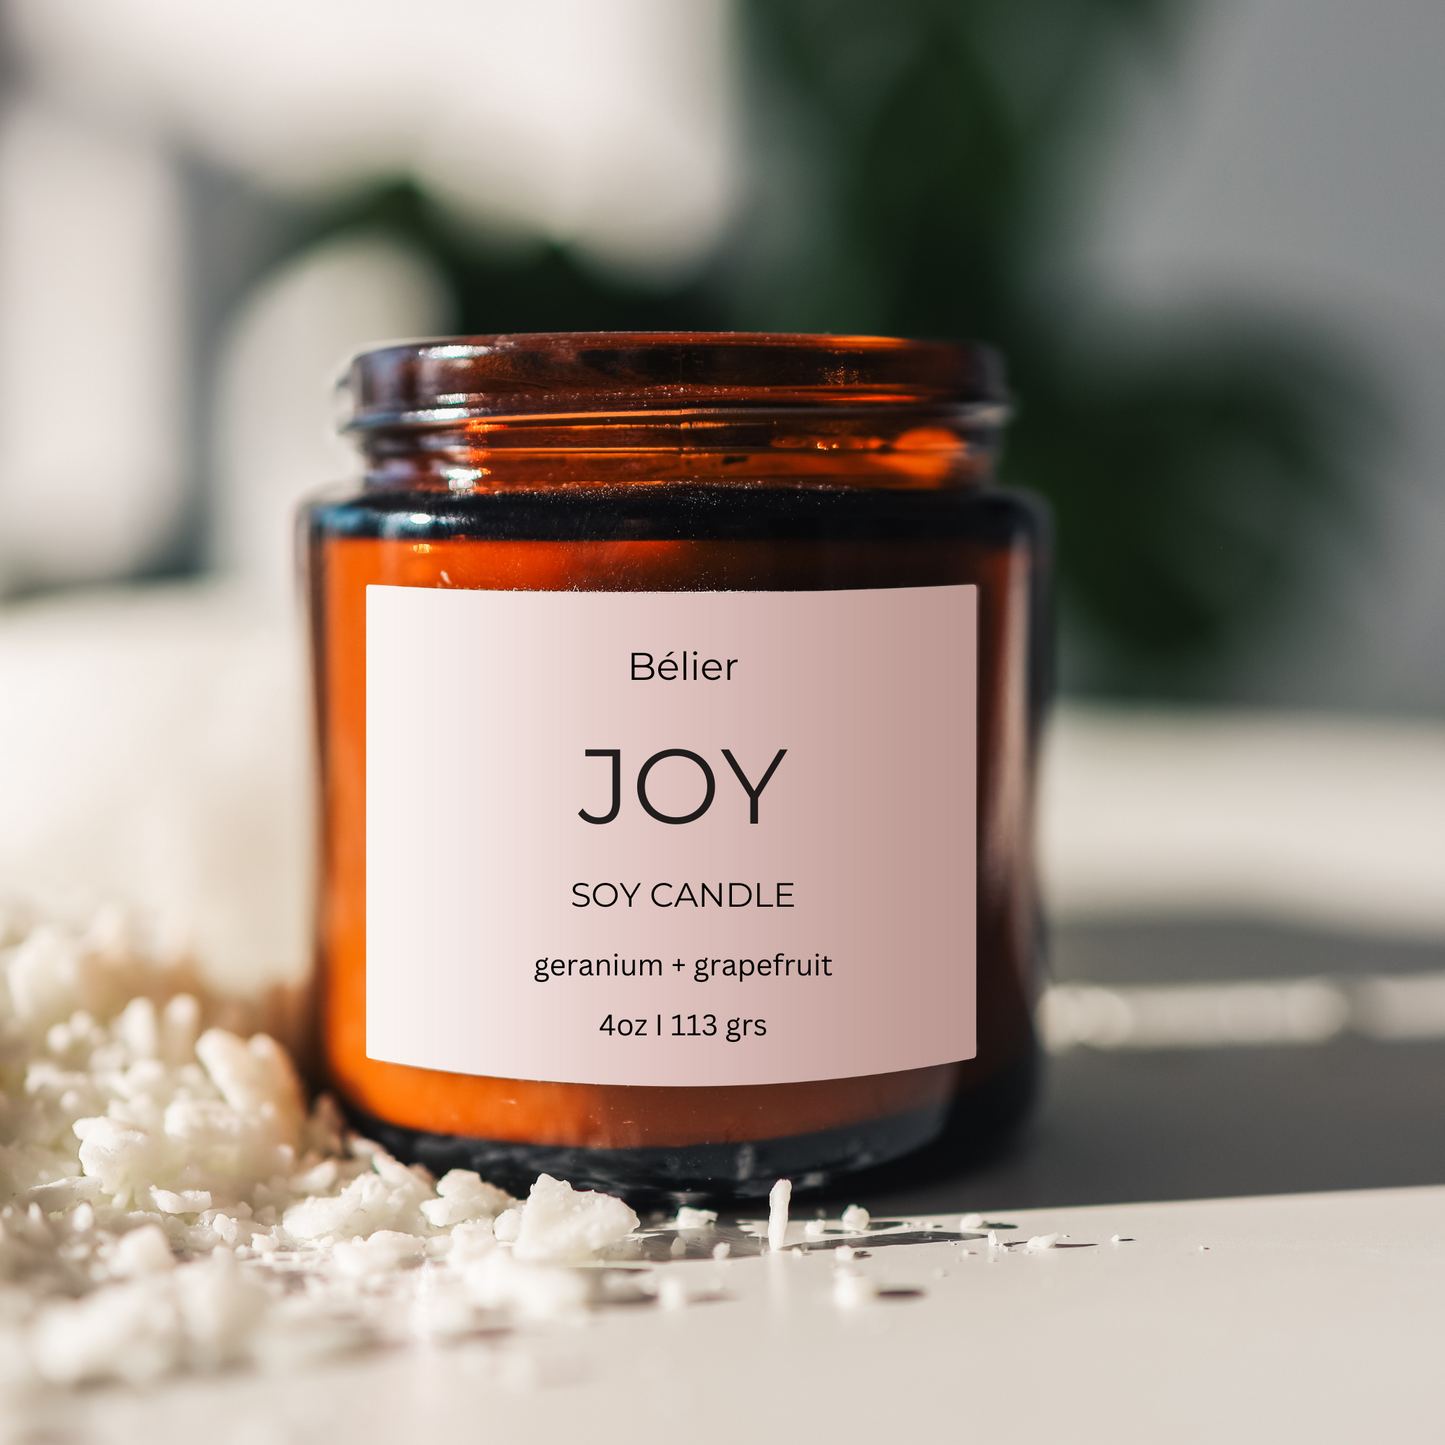 Joy- Soy candle with wood wick